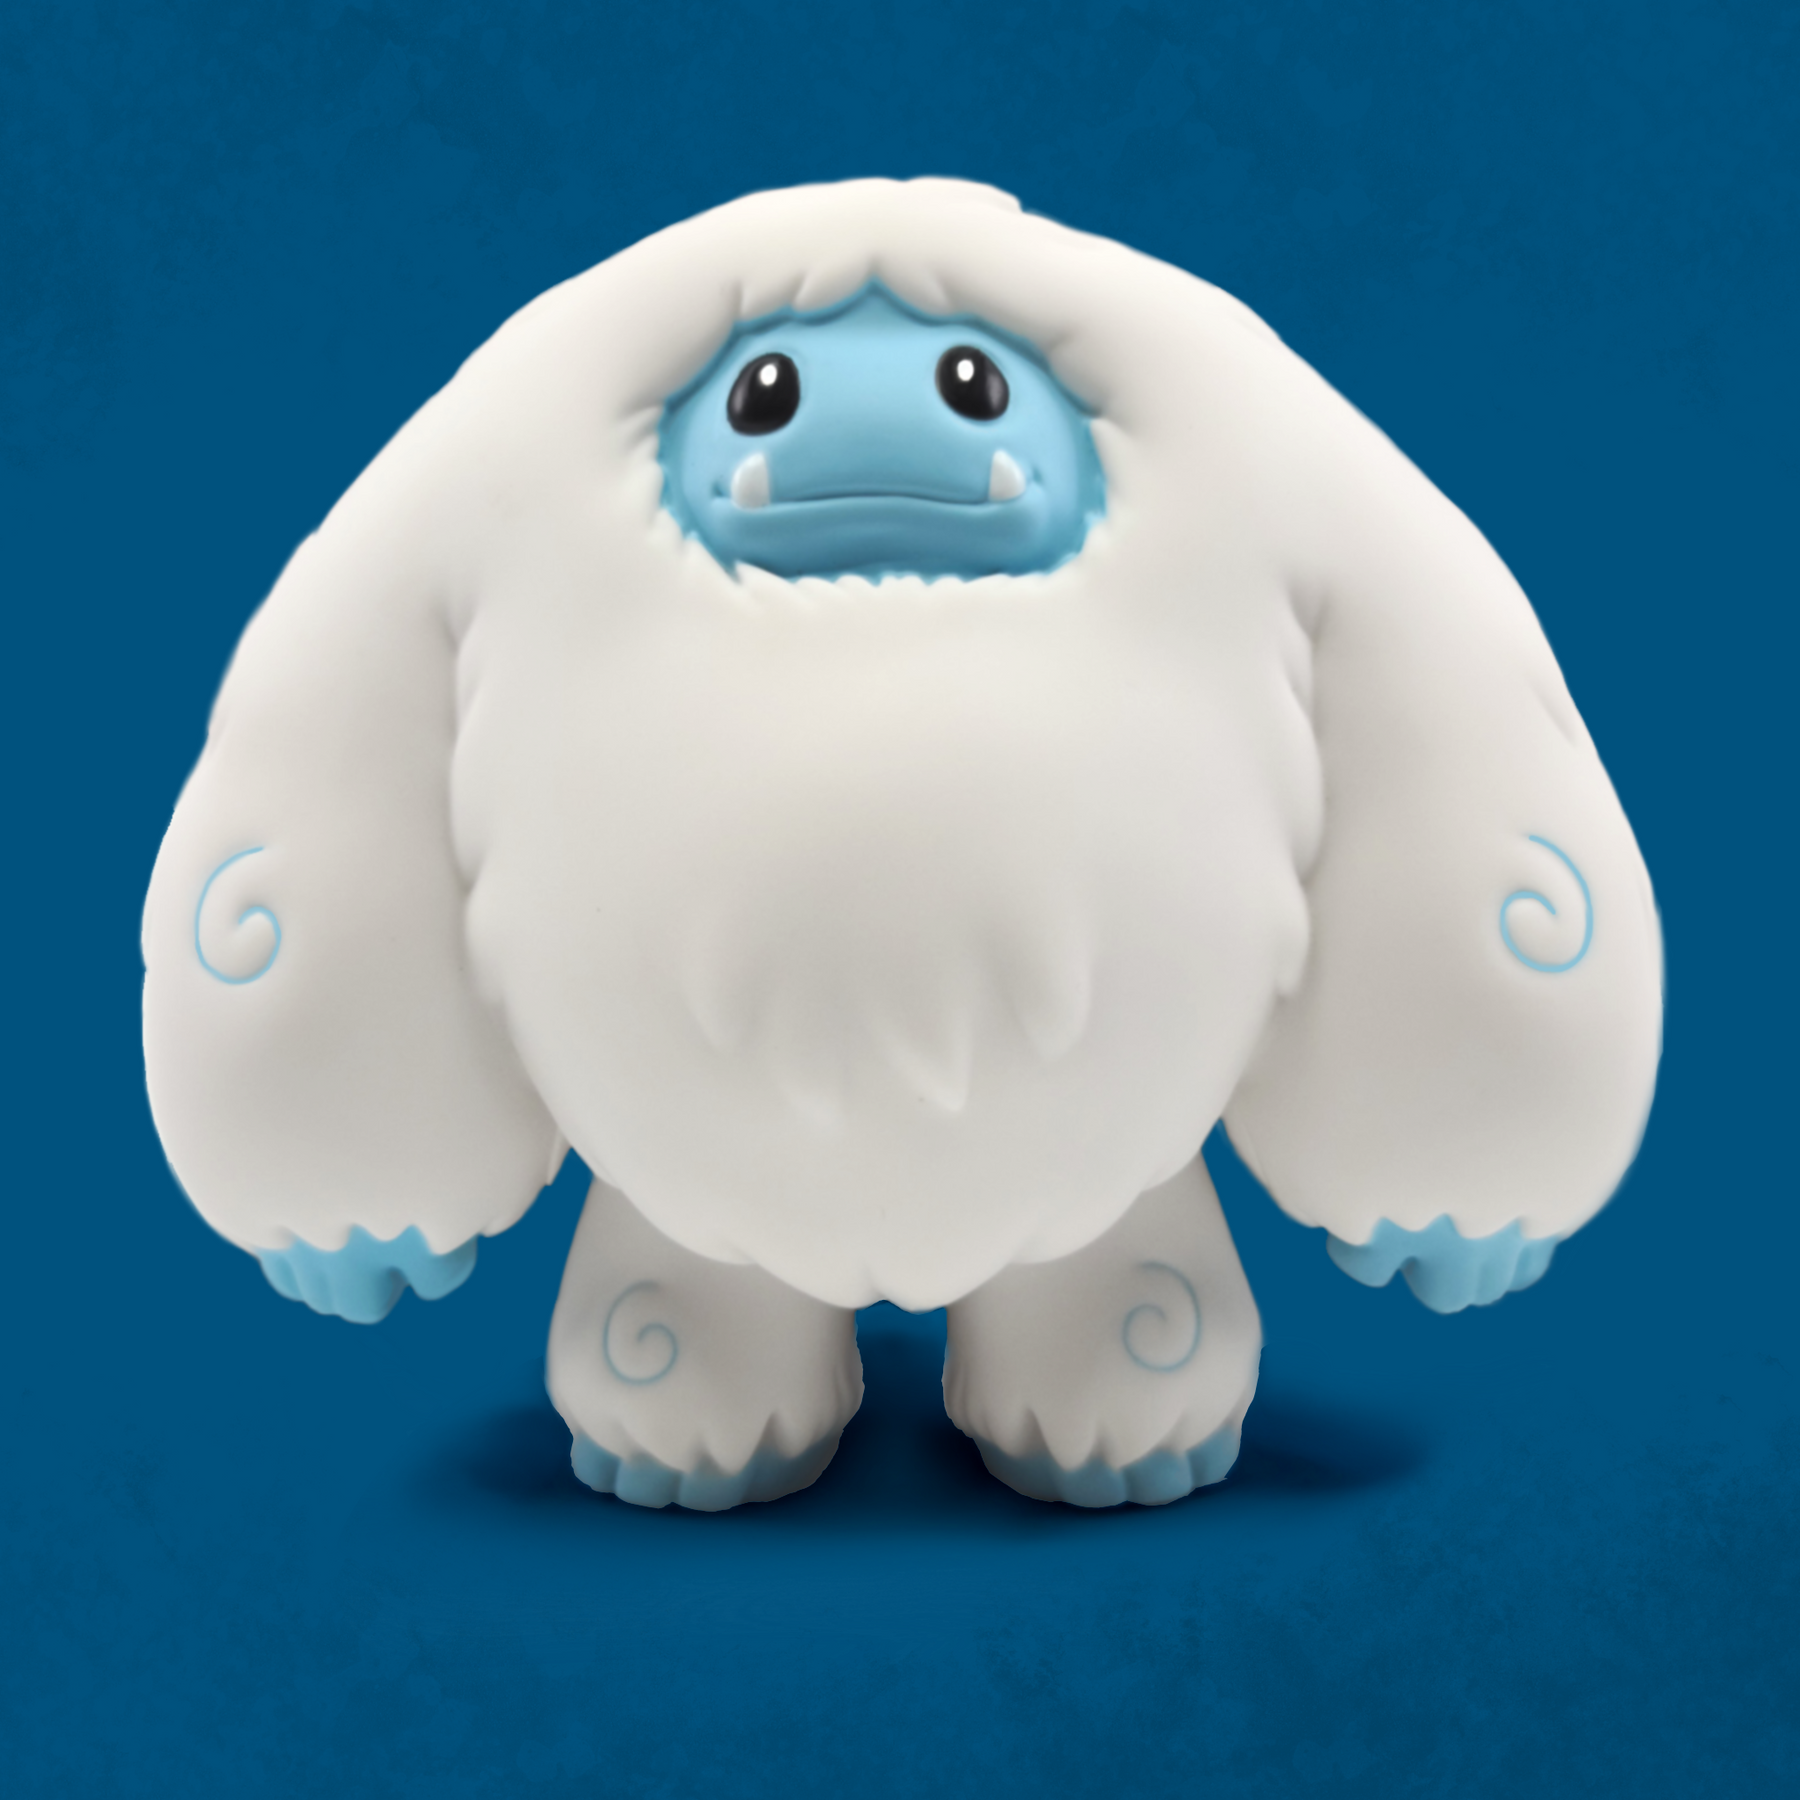 Classic Chomp 5-inch vinyl figure by Abominable Toys Available Now